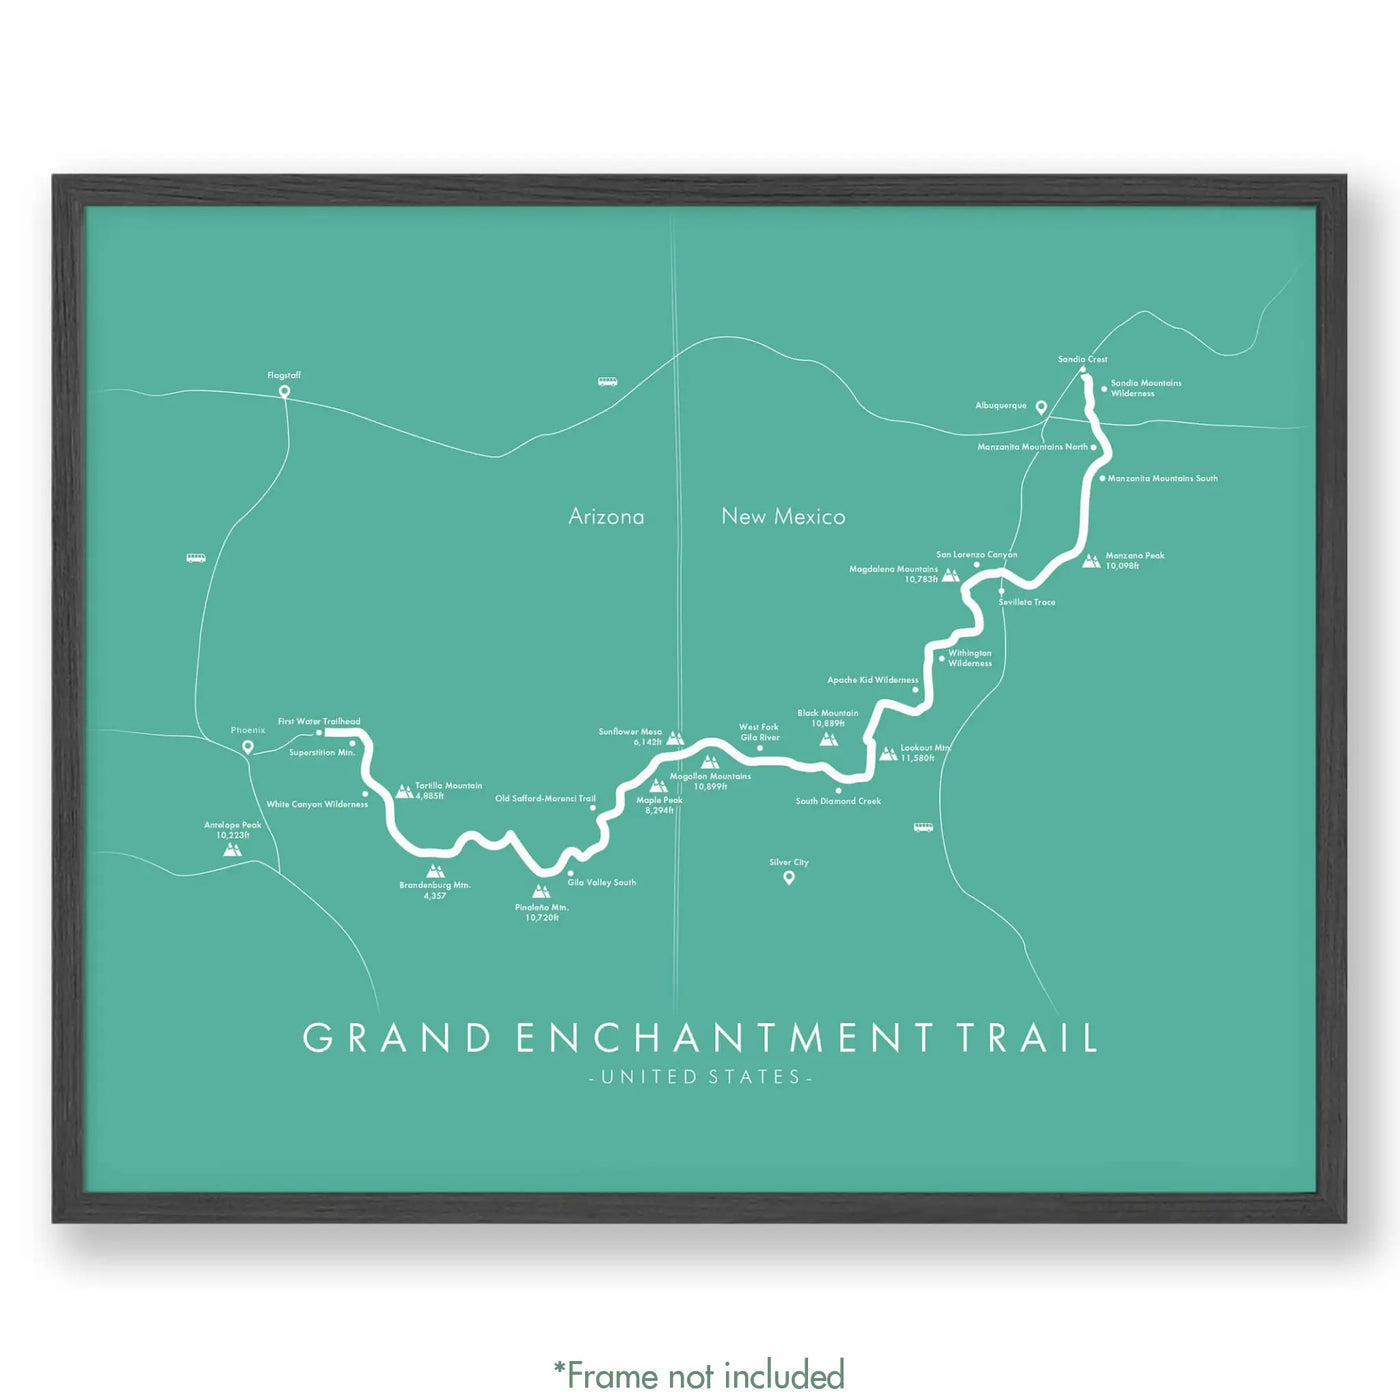 Trail Poster of Grand Enchantment Trail - Teal